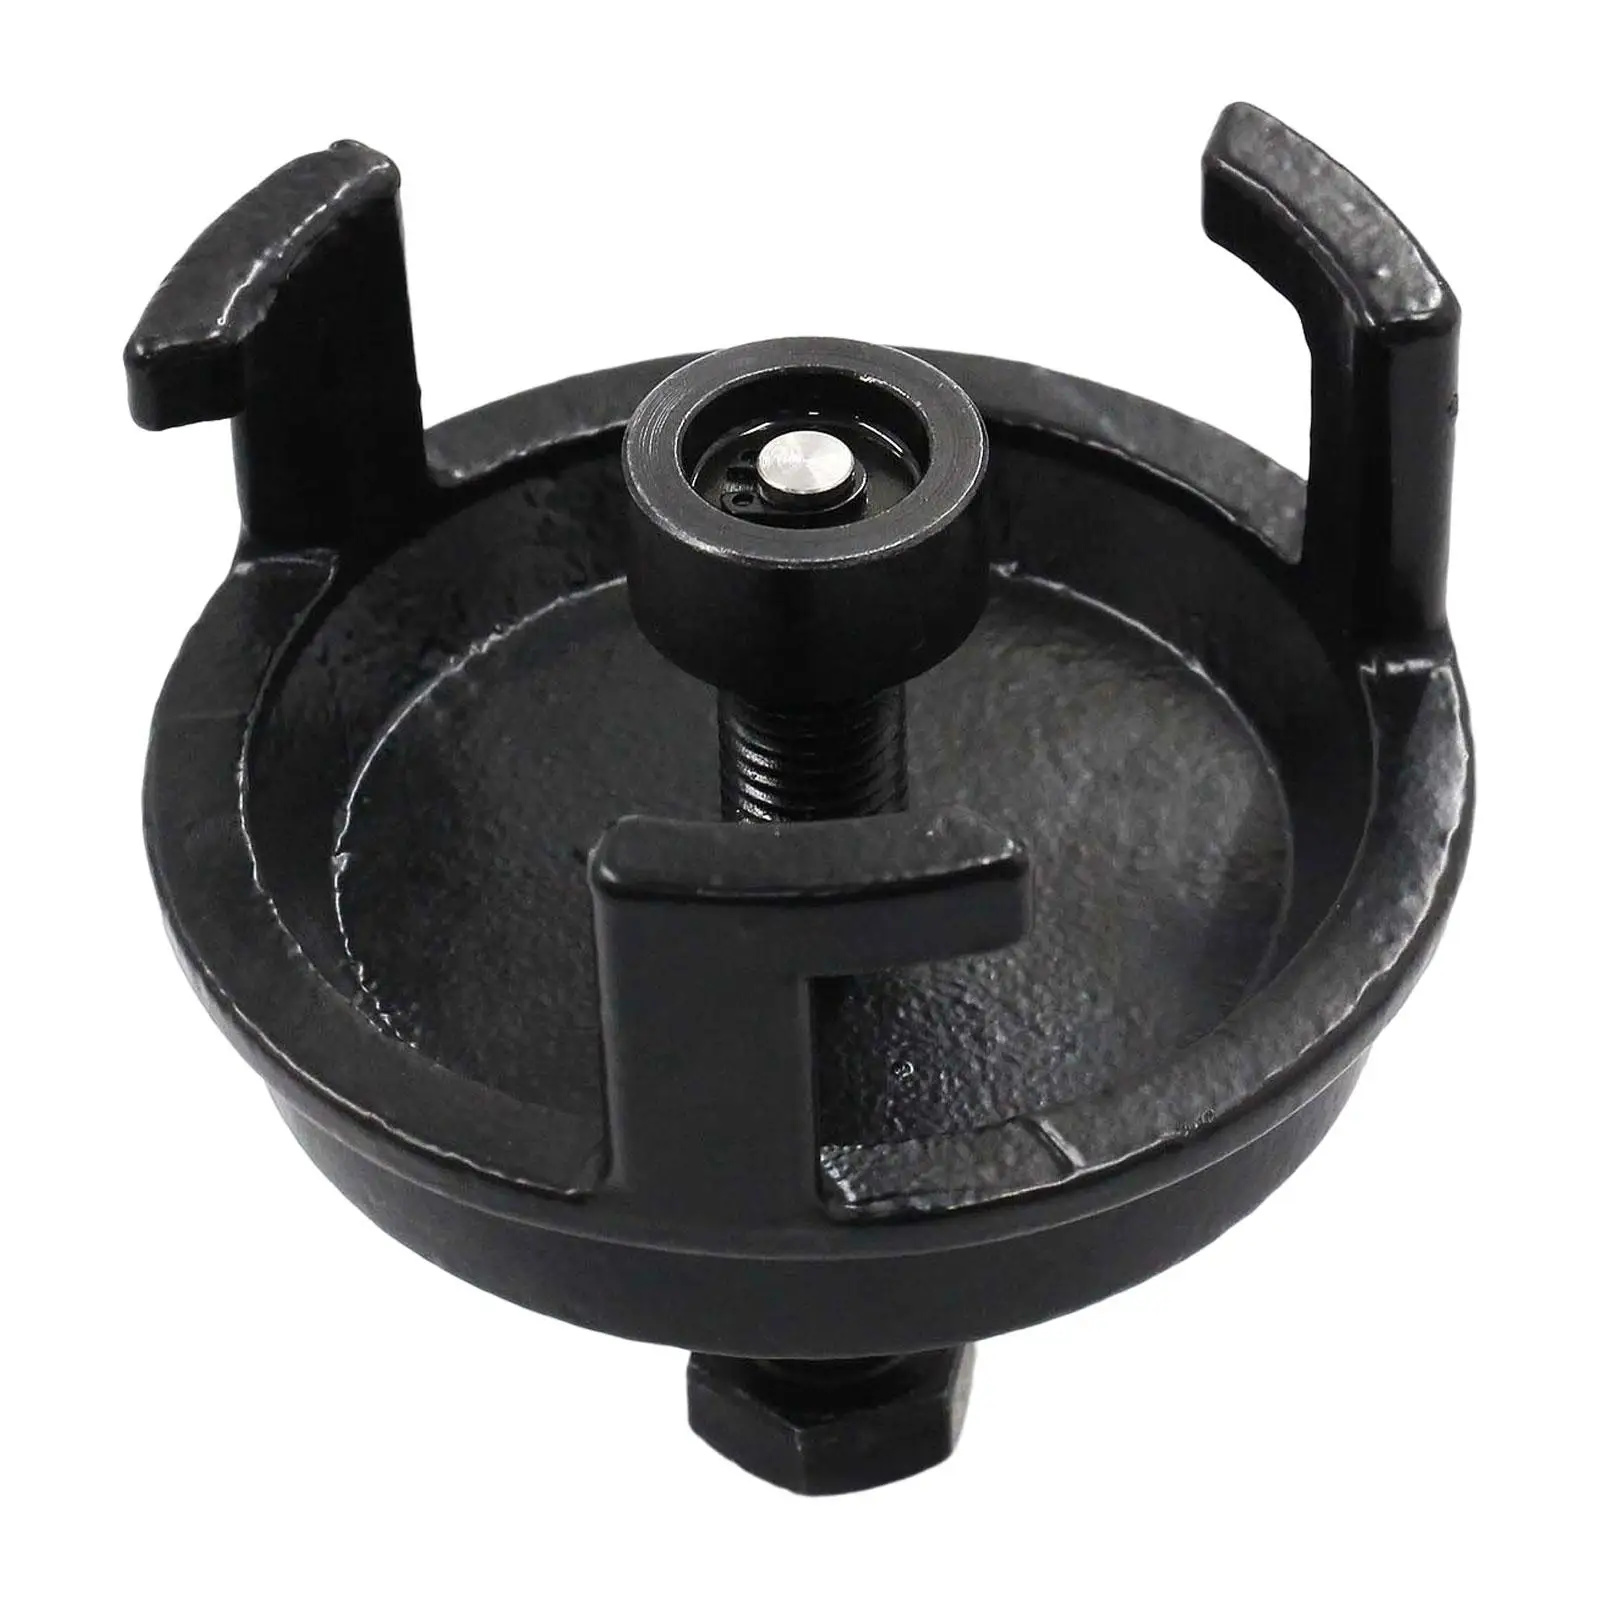 Harmonic Balancer Puller Equipment Components Replacement Parts for Car Simple to Use Removal Tool Durable Crank Pulley